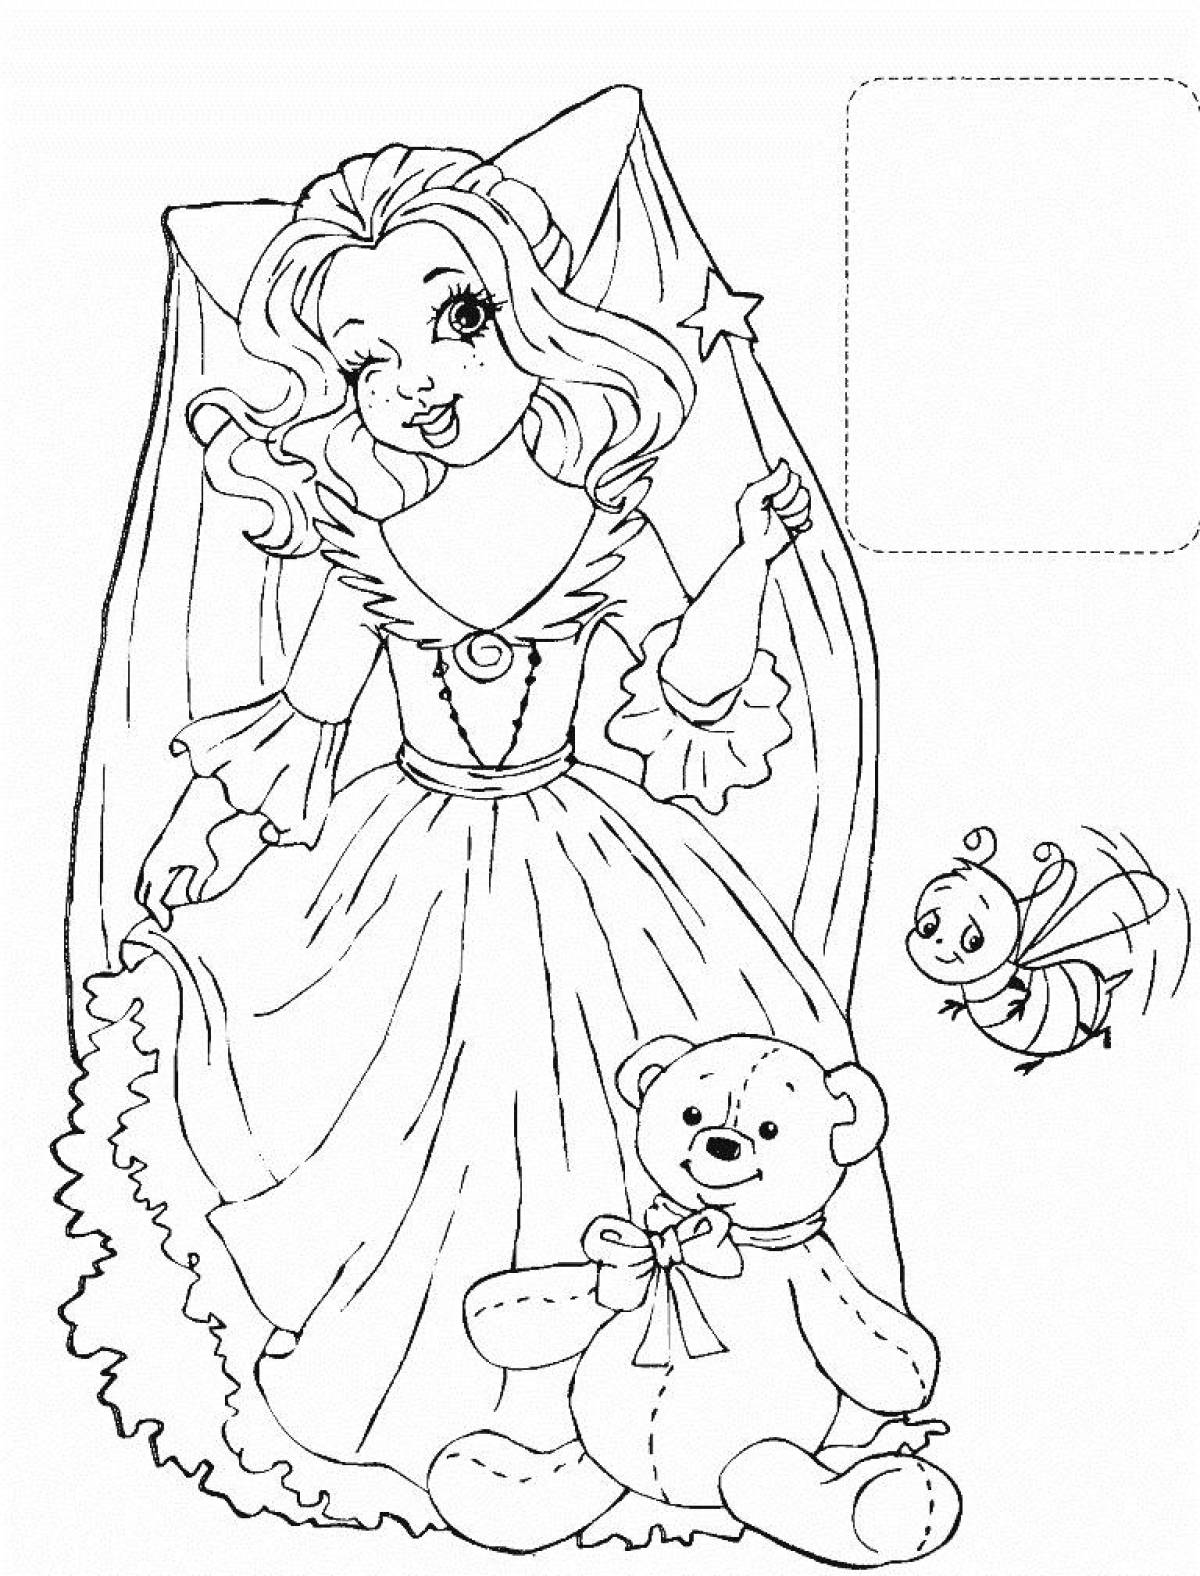 Princess palace coloring book for children 5-6 years old